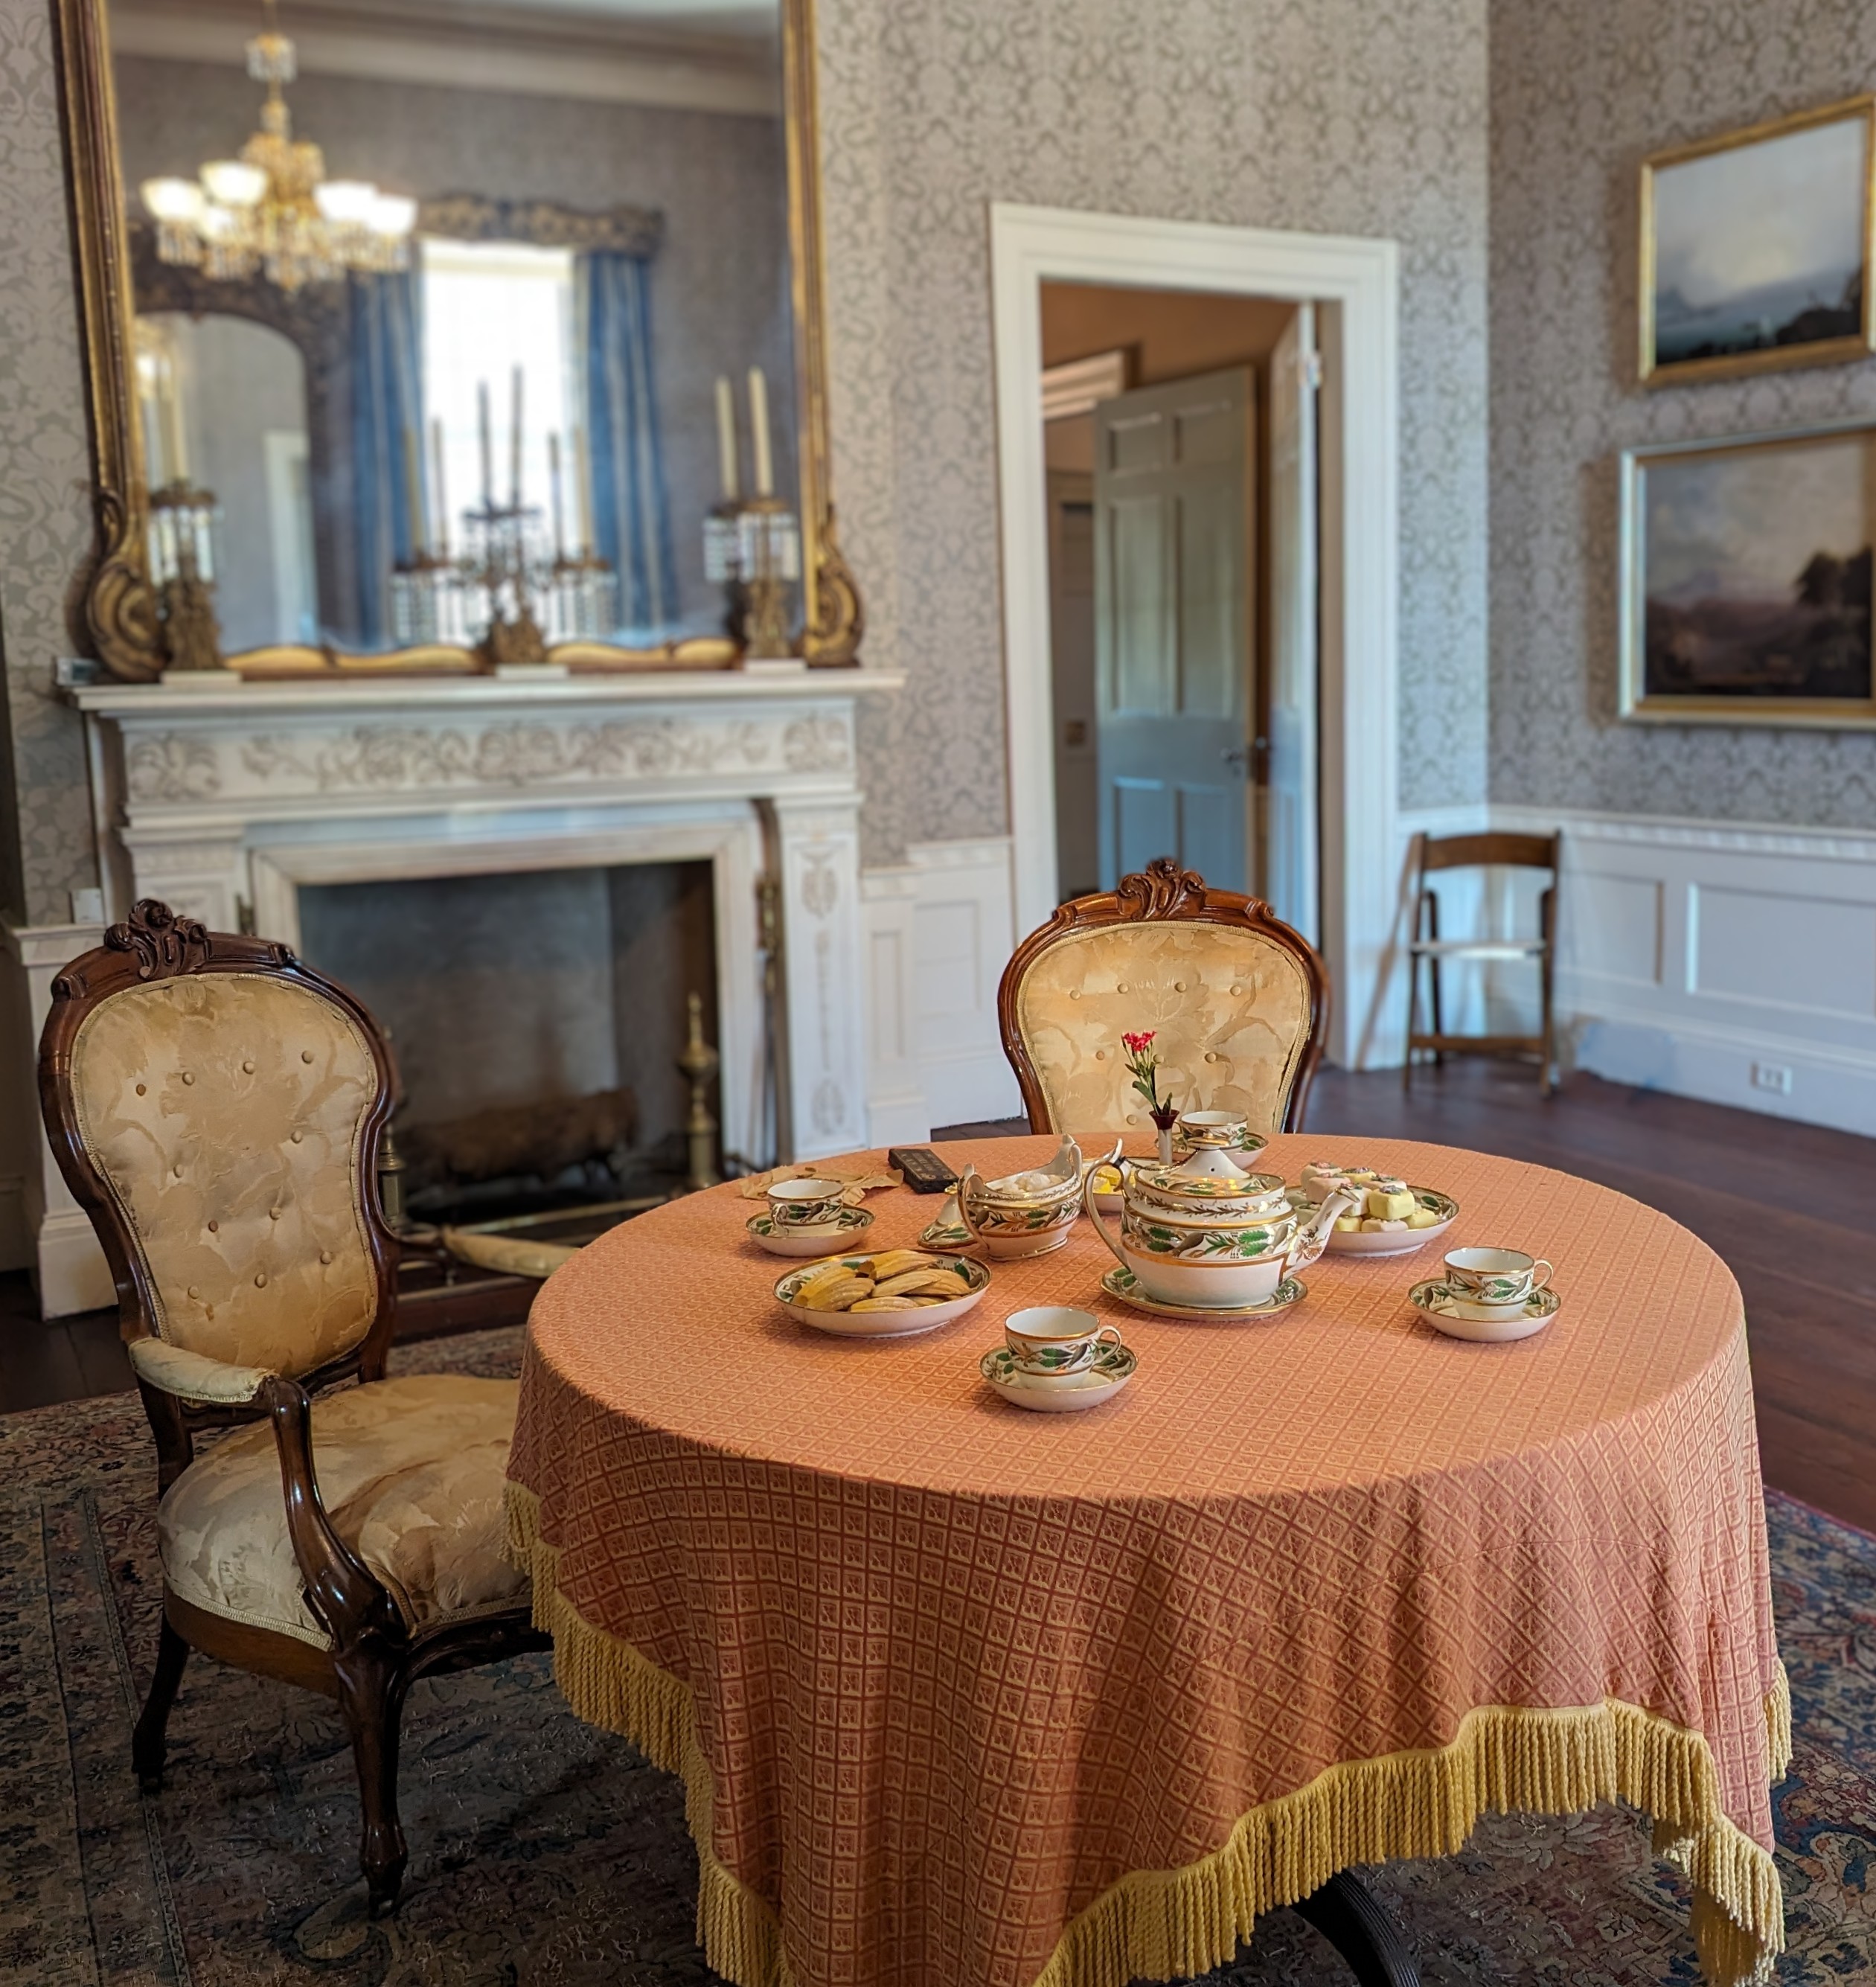 Table with fringed cloth and two chairs. On the table is an ornate tea set.